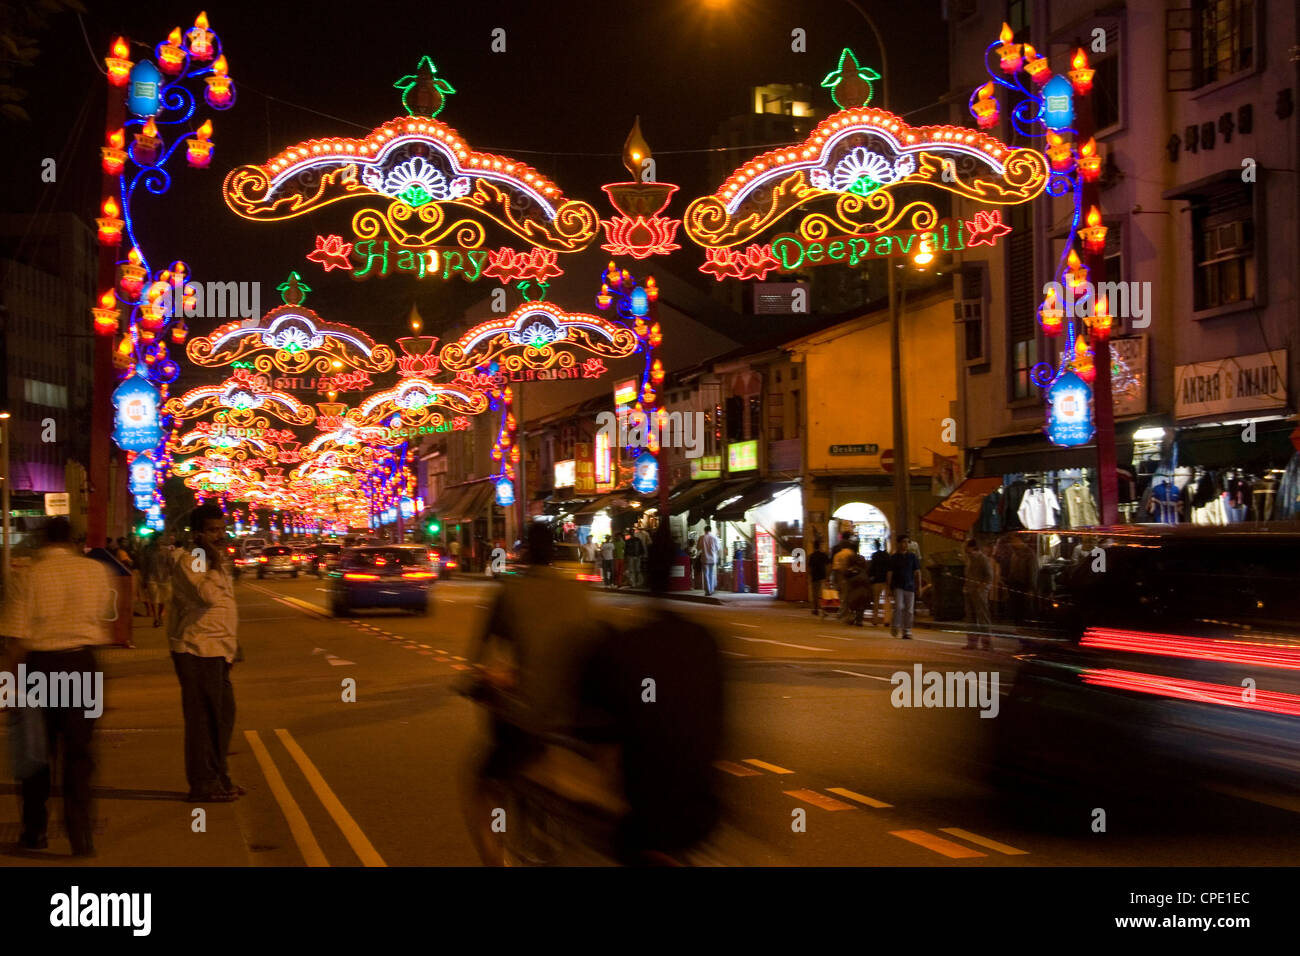 Activity during Deepavali in Little India, Singapore Stock Photo